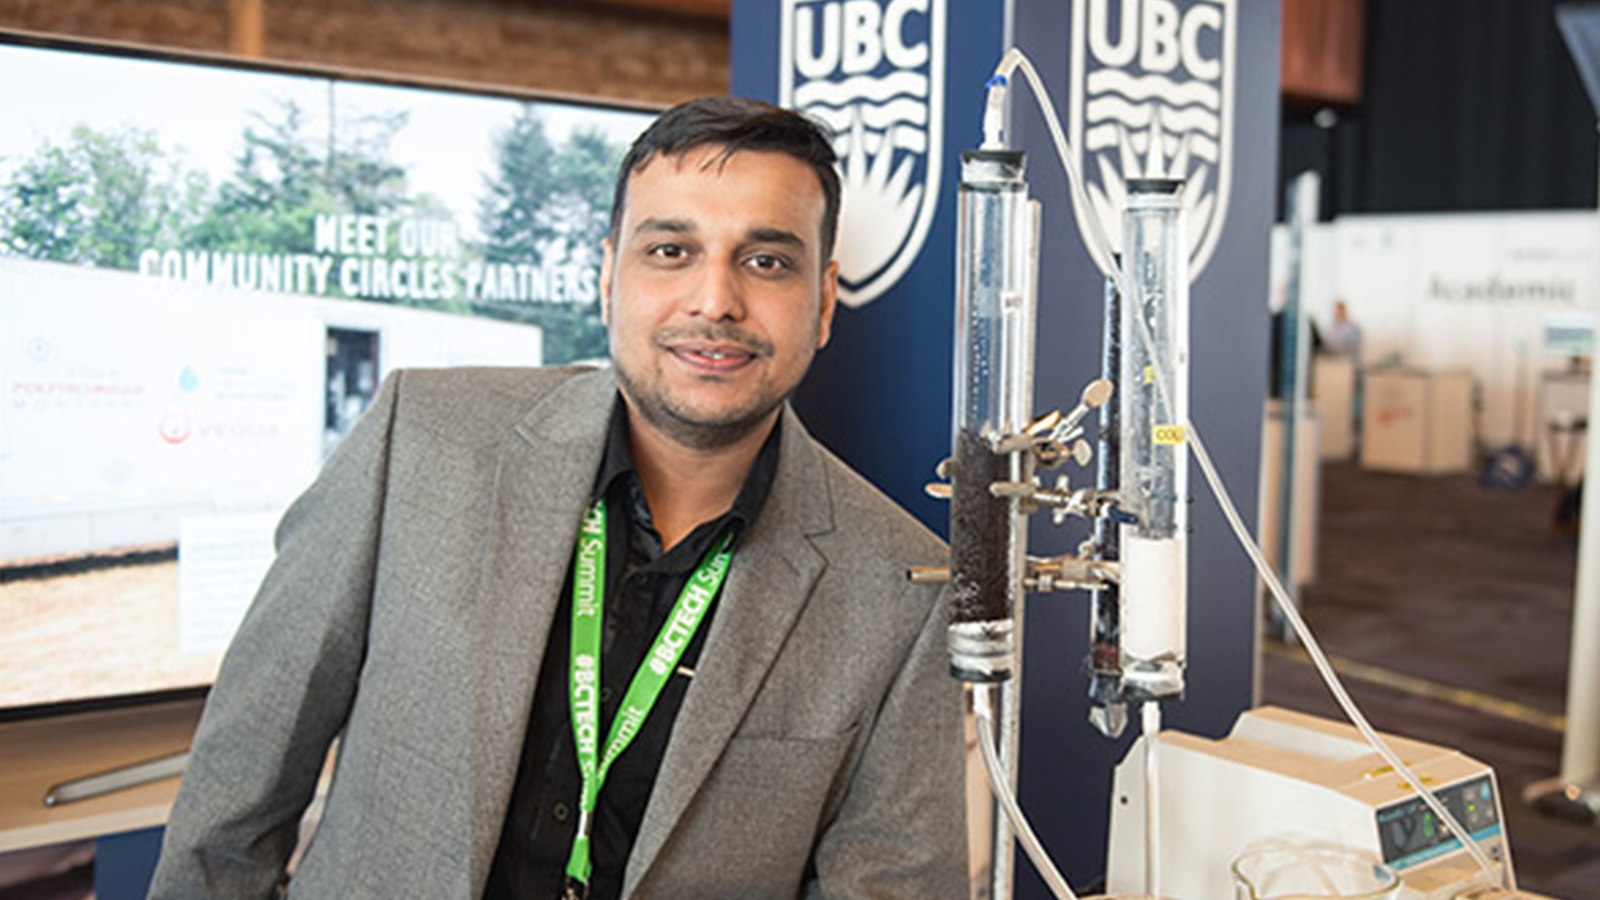 Hire a UBC MBA candidate and get up to $10,000 to offset hiring costs